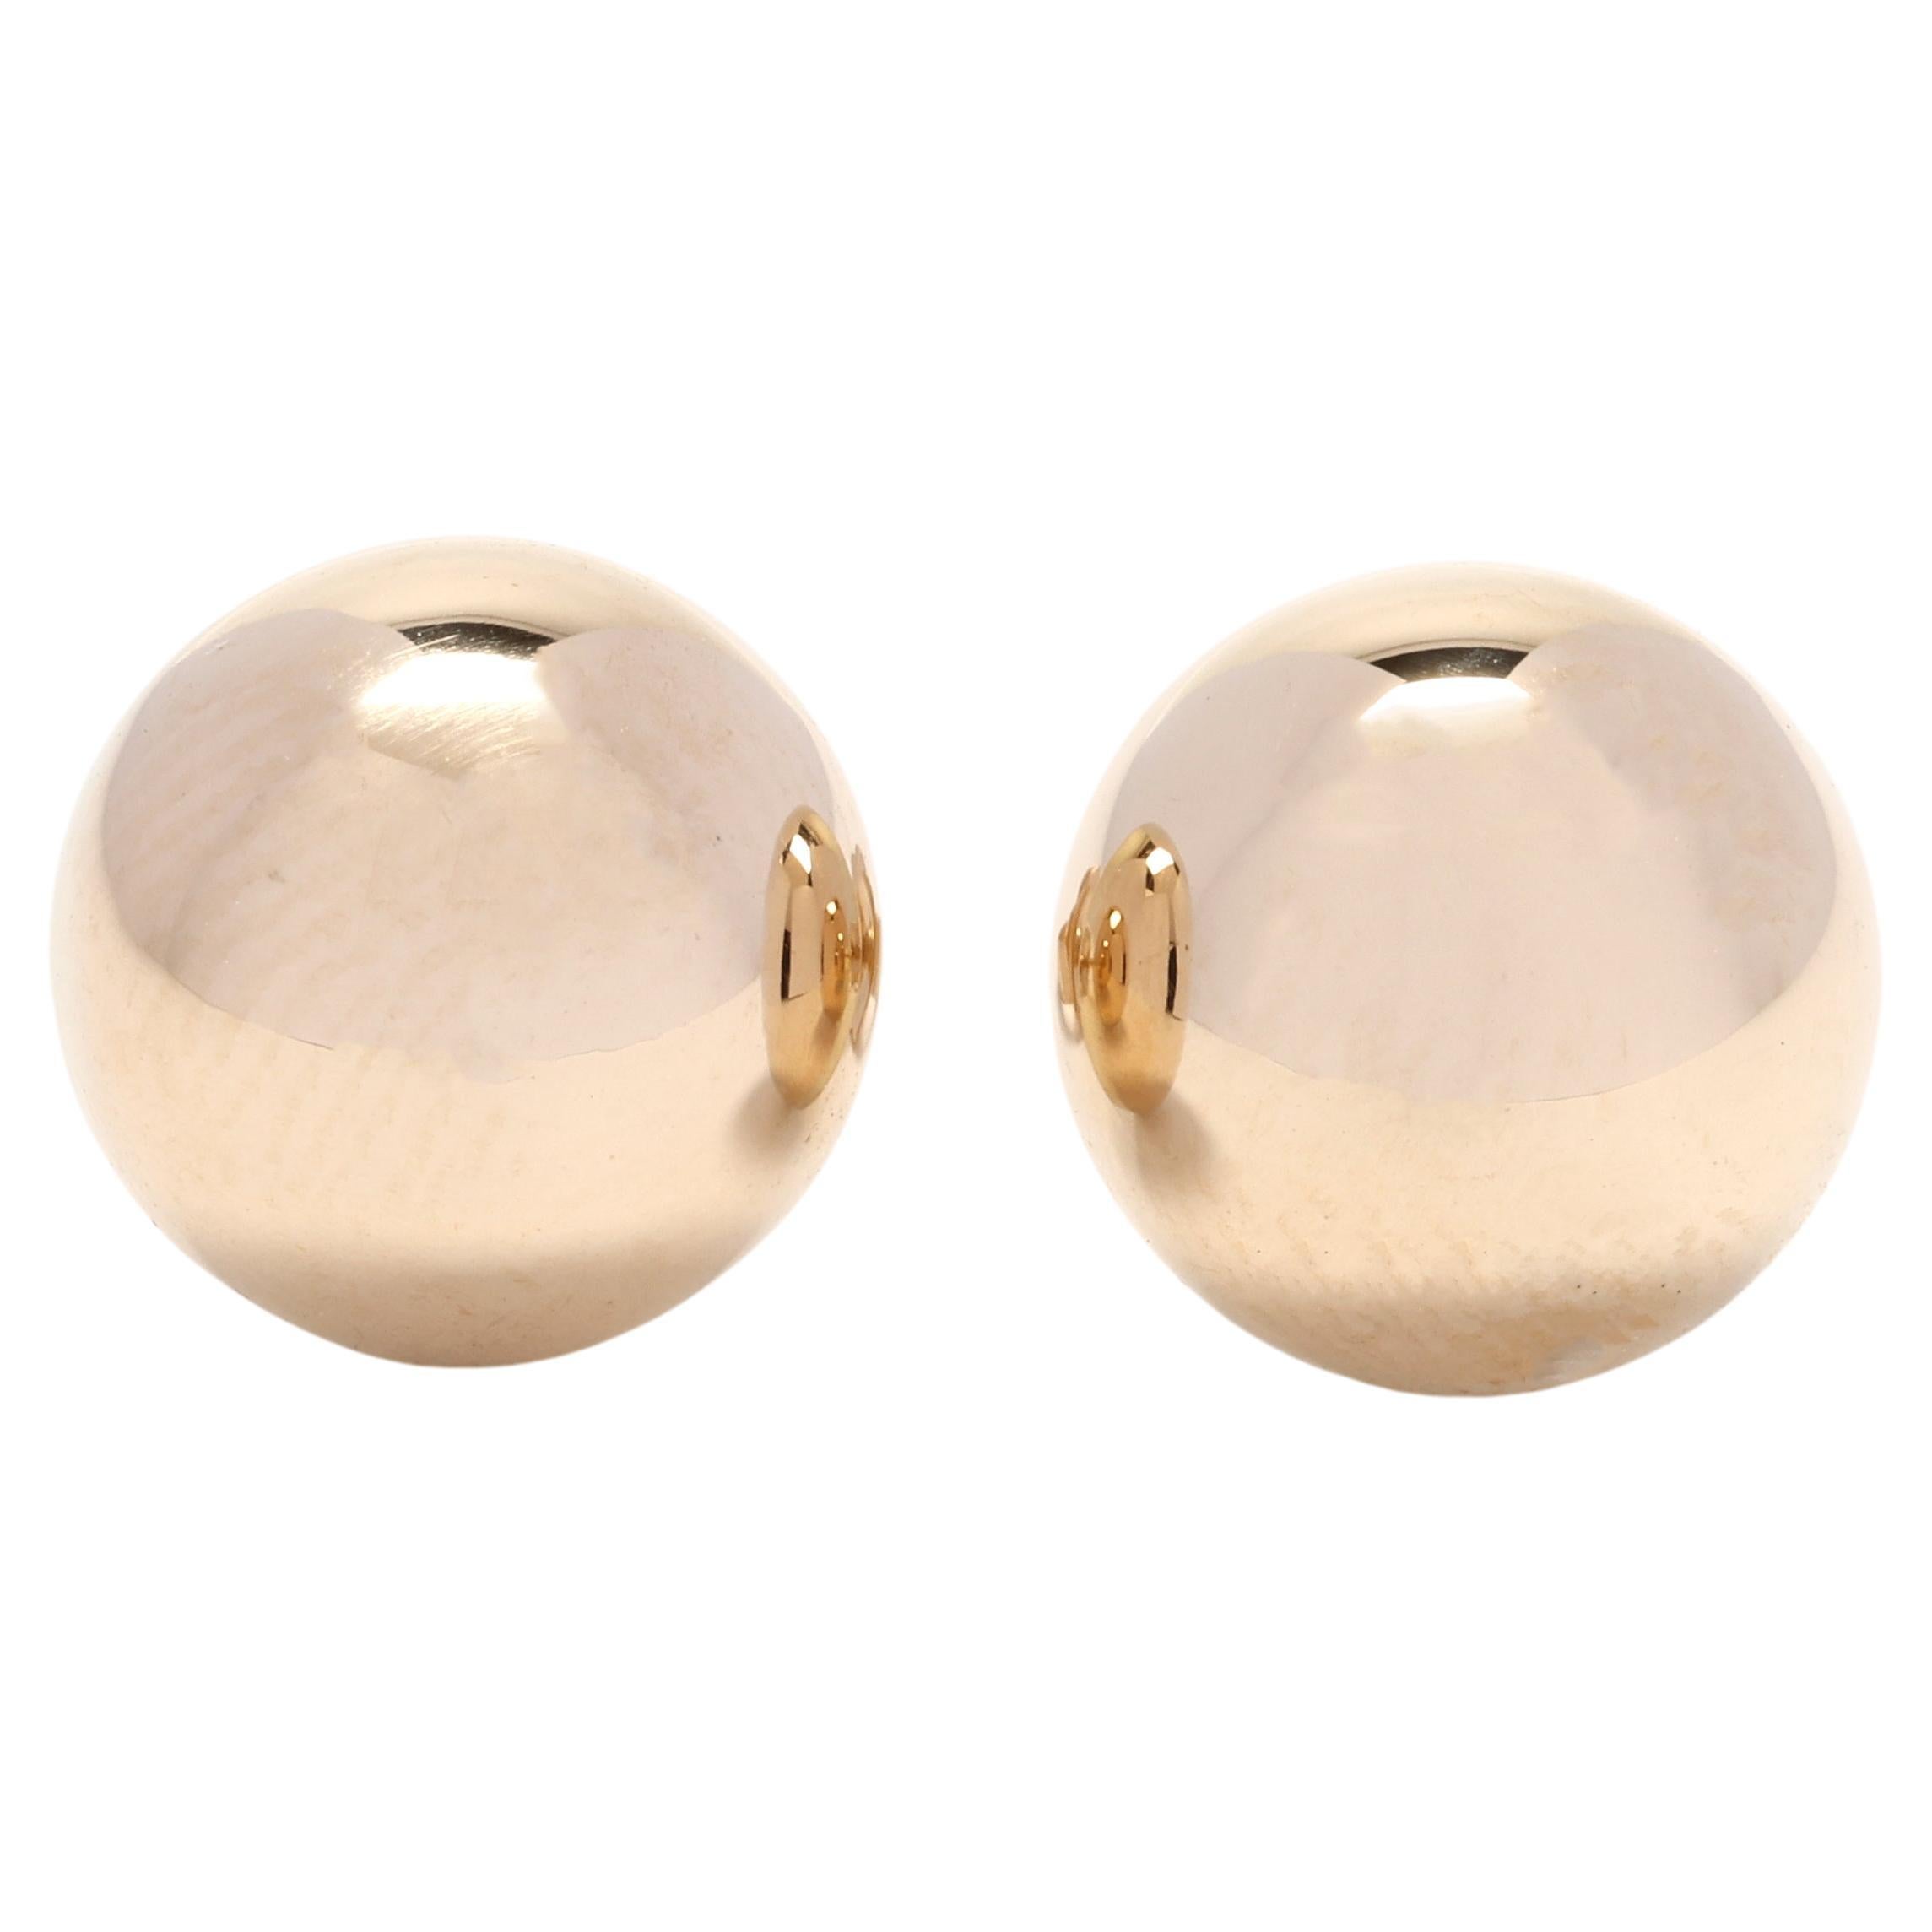 14k Yellow Gold Dome Studs, Round Dome Earrings, Dainty Studs